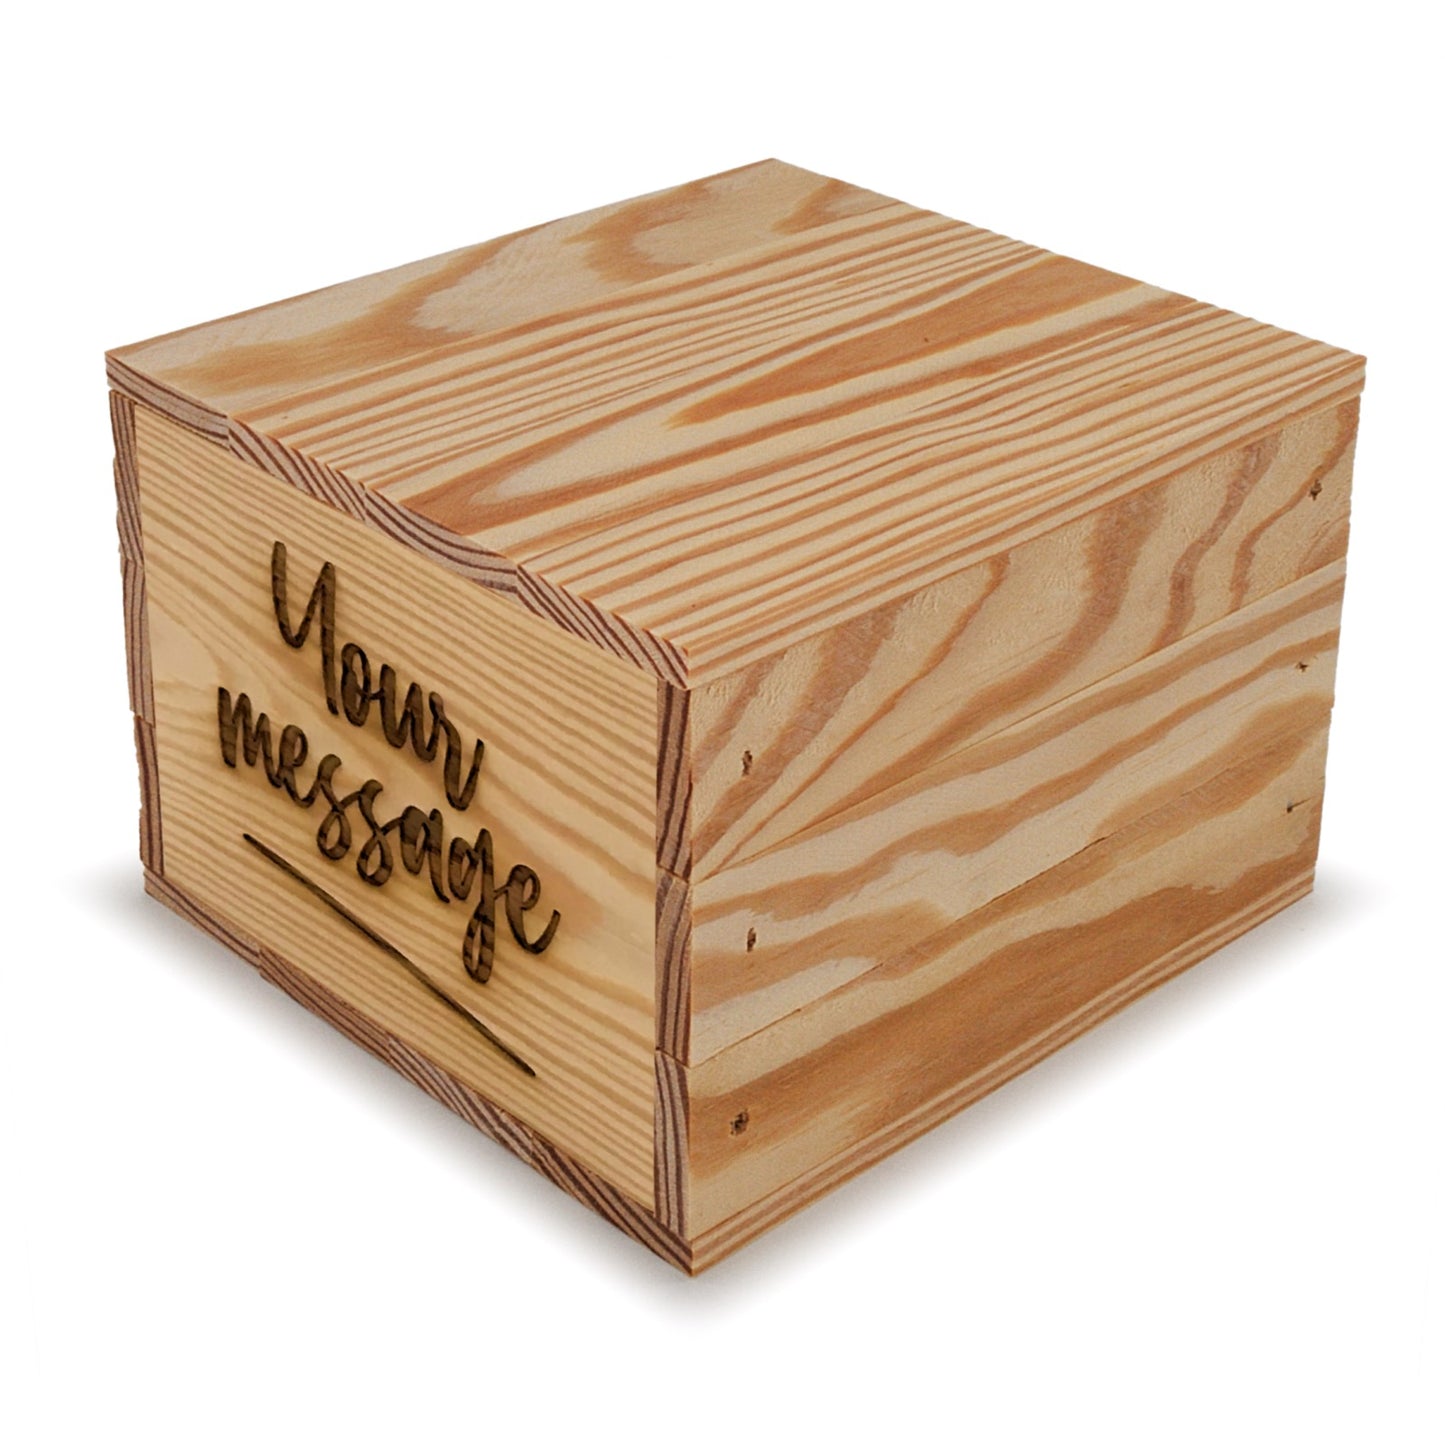 Small wooden crate with lid and custom message 6x6.25x5.25, 6-BX-6-6.25-5.25-ST-NW-LL, 12-BX-6-6.25-5.25-ST-NW-LL, 24-BX-6-6.25-5.25-ST-NW-LL, 48-BX-6-6.25-5.25-ST-NW-LL, 96-BX-6-6.25-5.25-ST-NW-LL